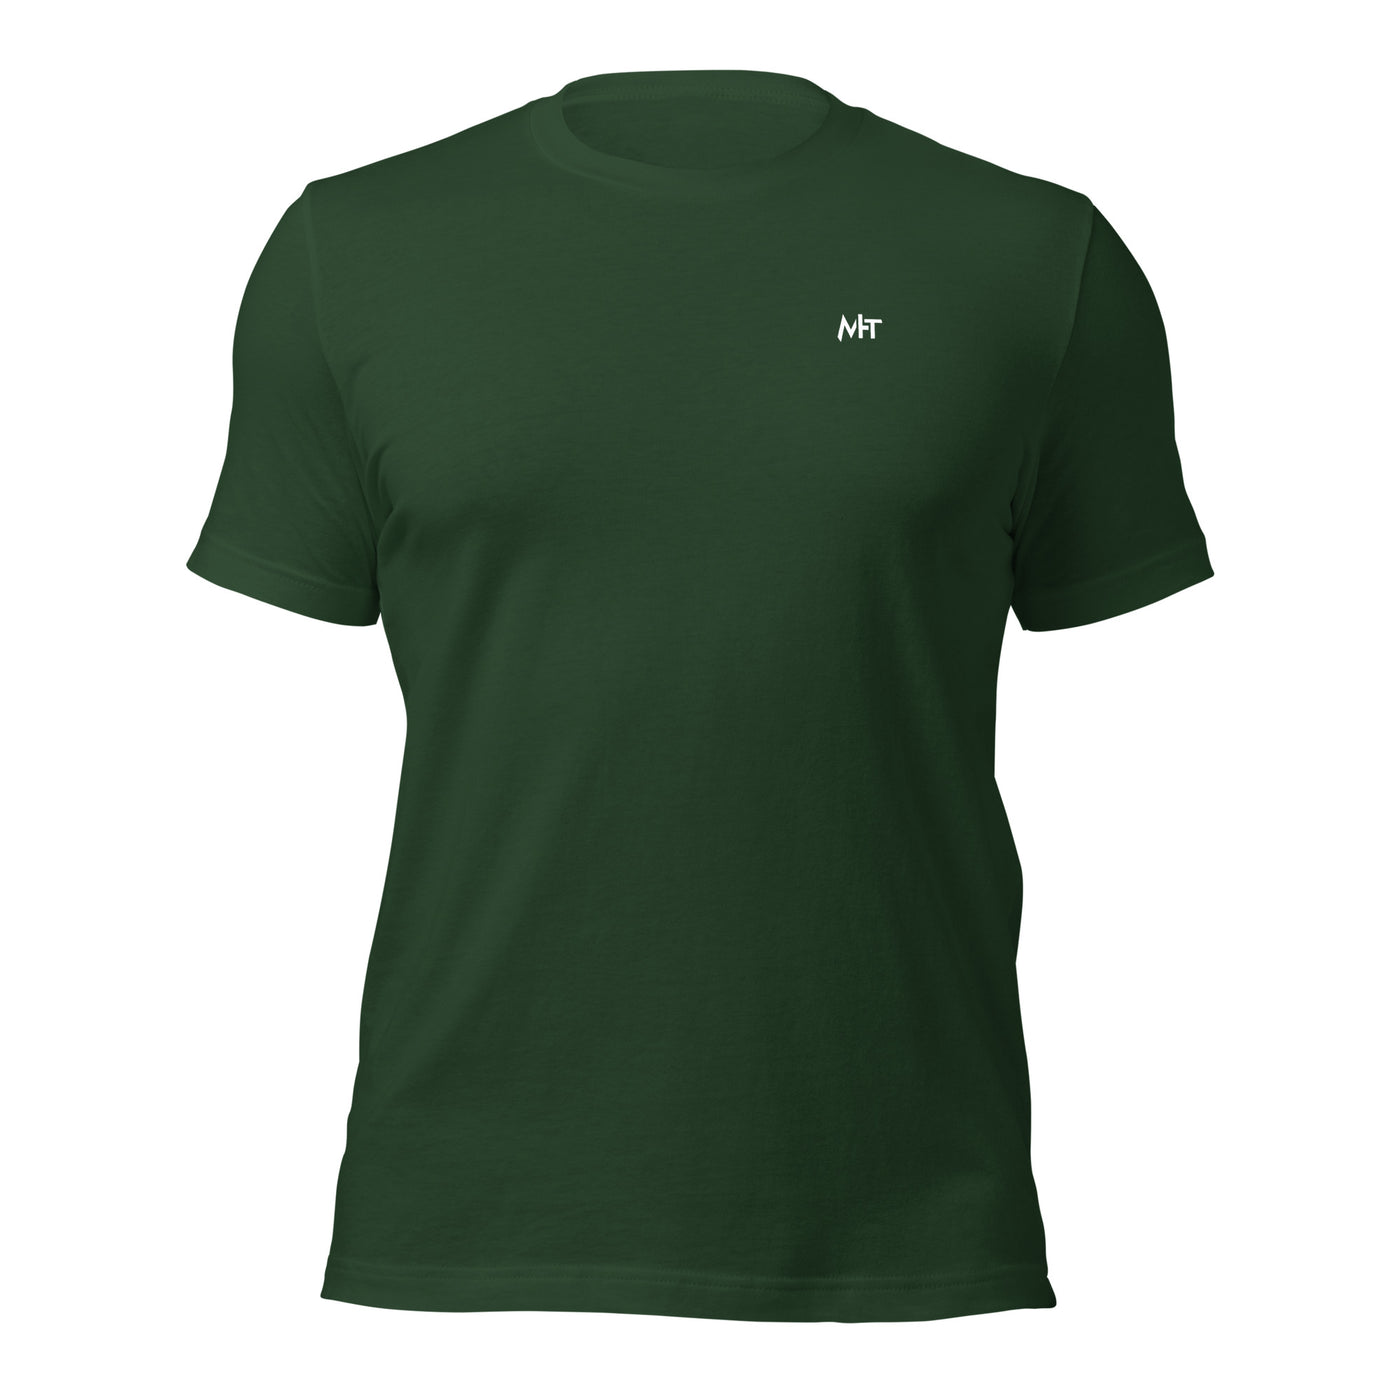 Proudly Serving as an Army Mom - Unisex t-shirt ( Back Print )